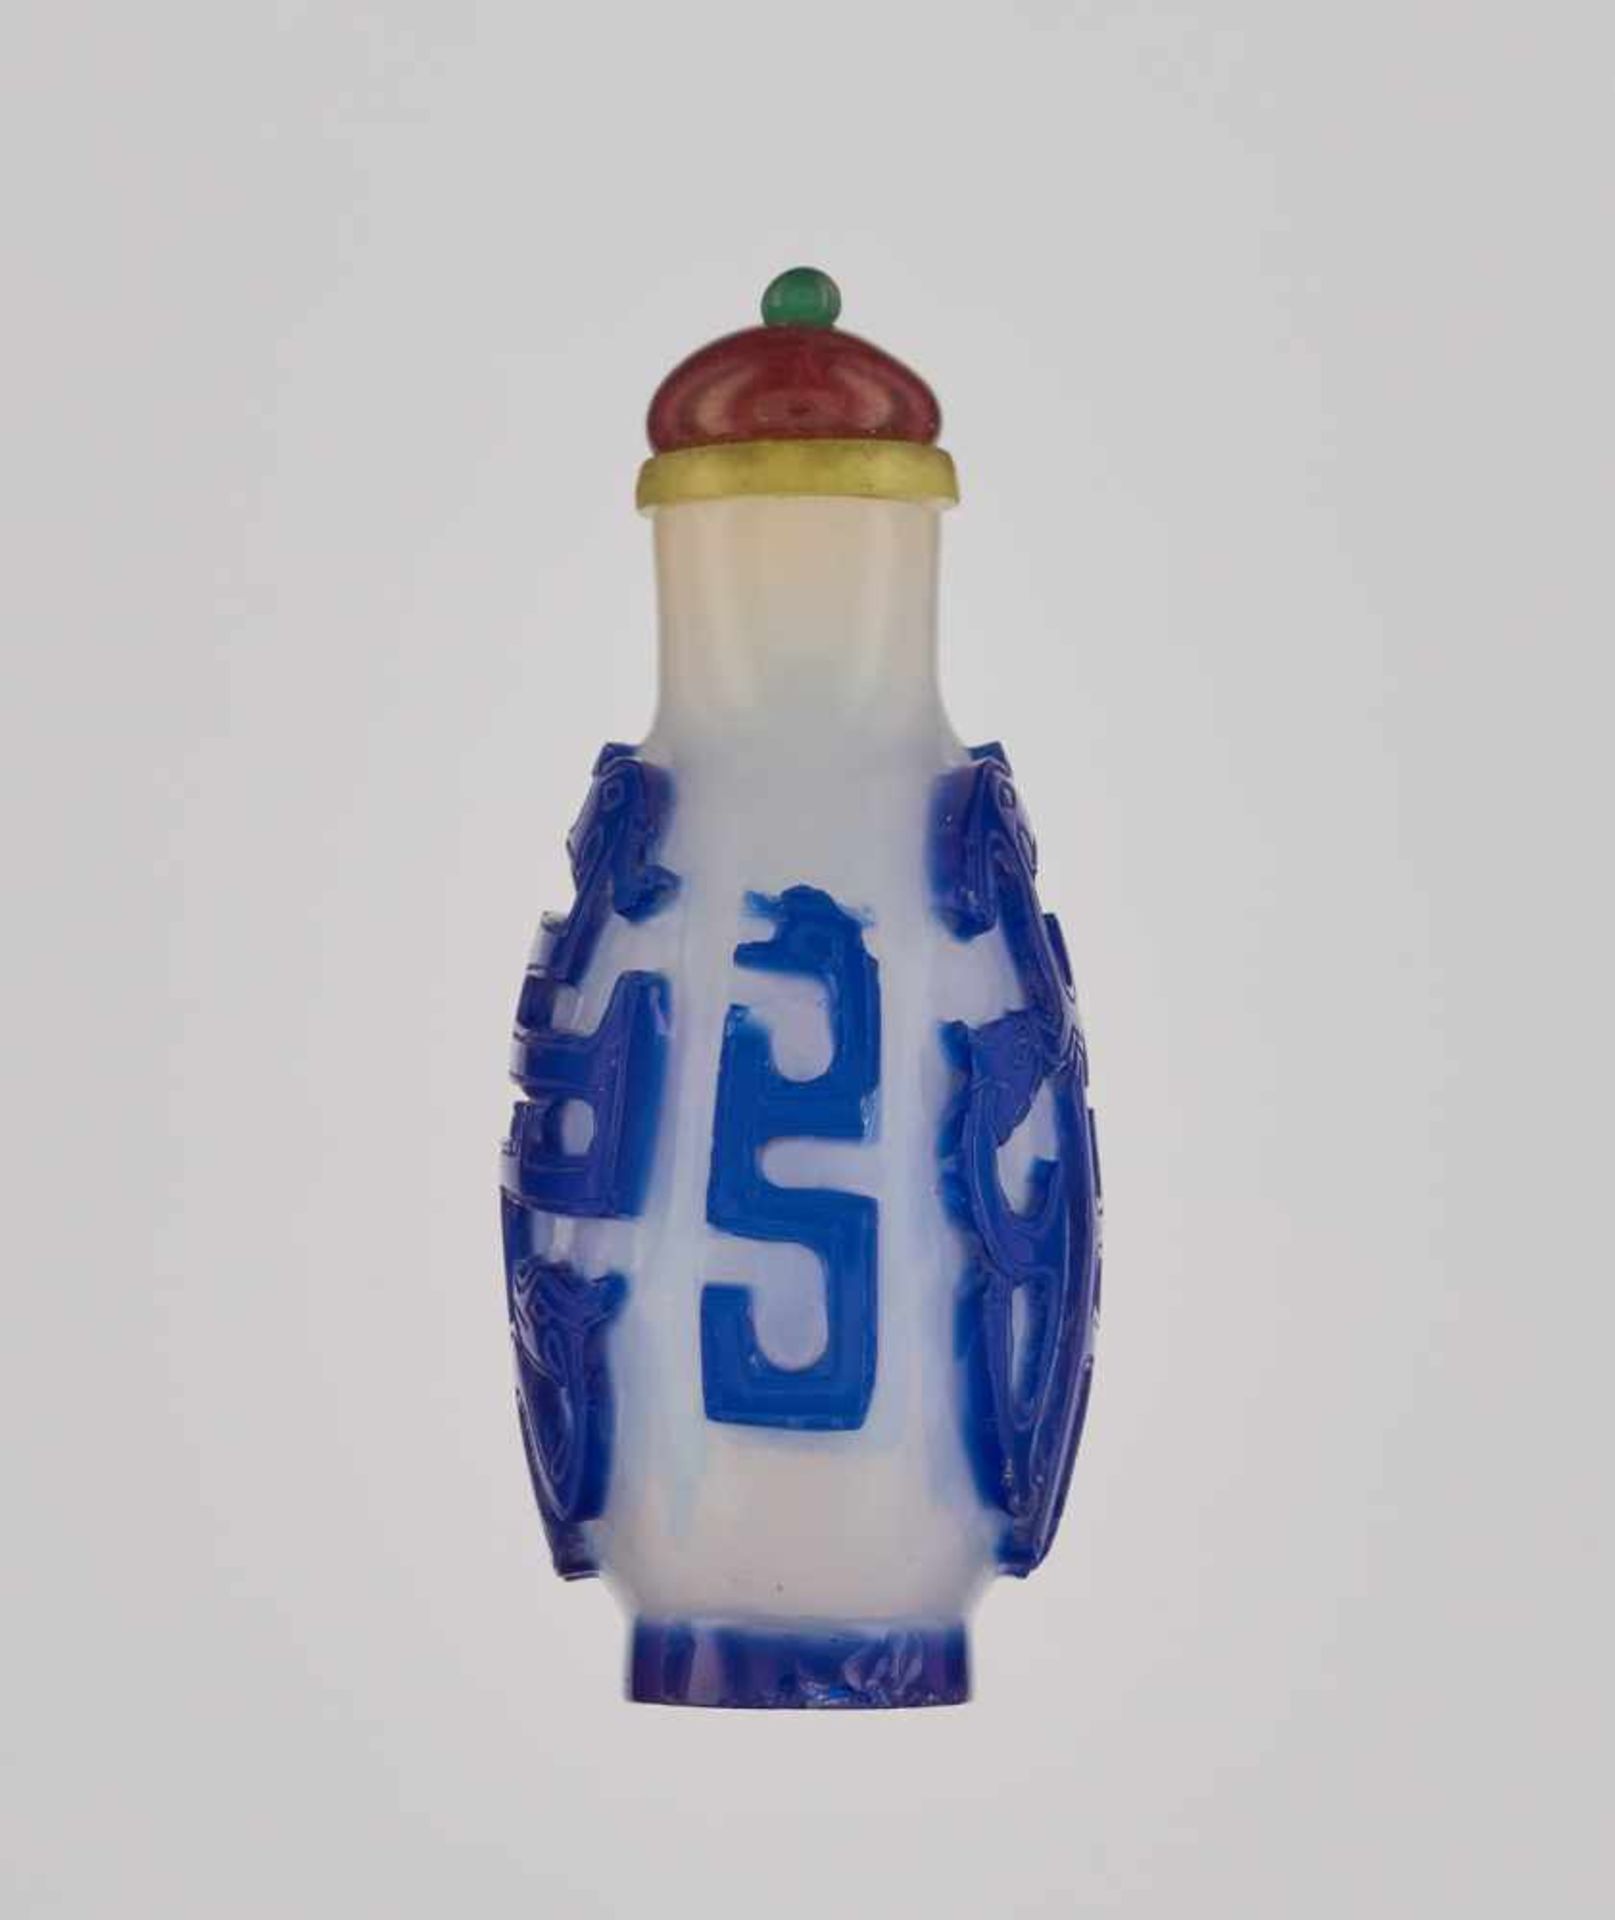 A SAPPHIRE-BLUE ON MILKY-WHITE OVERLAY ‘KUILONG’ GLASS SNUFF BOTTLE Glass, with incised overlay - Image 4 of 6